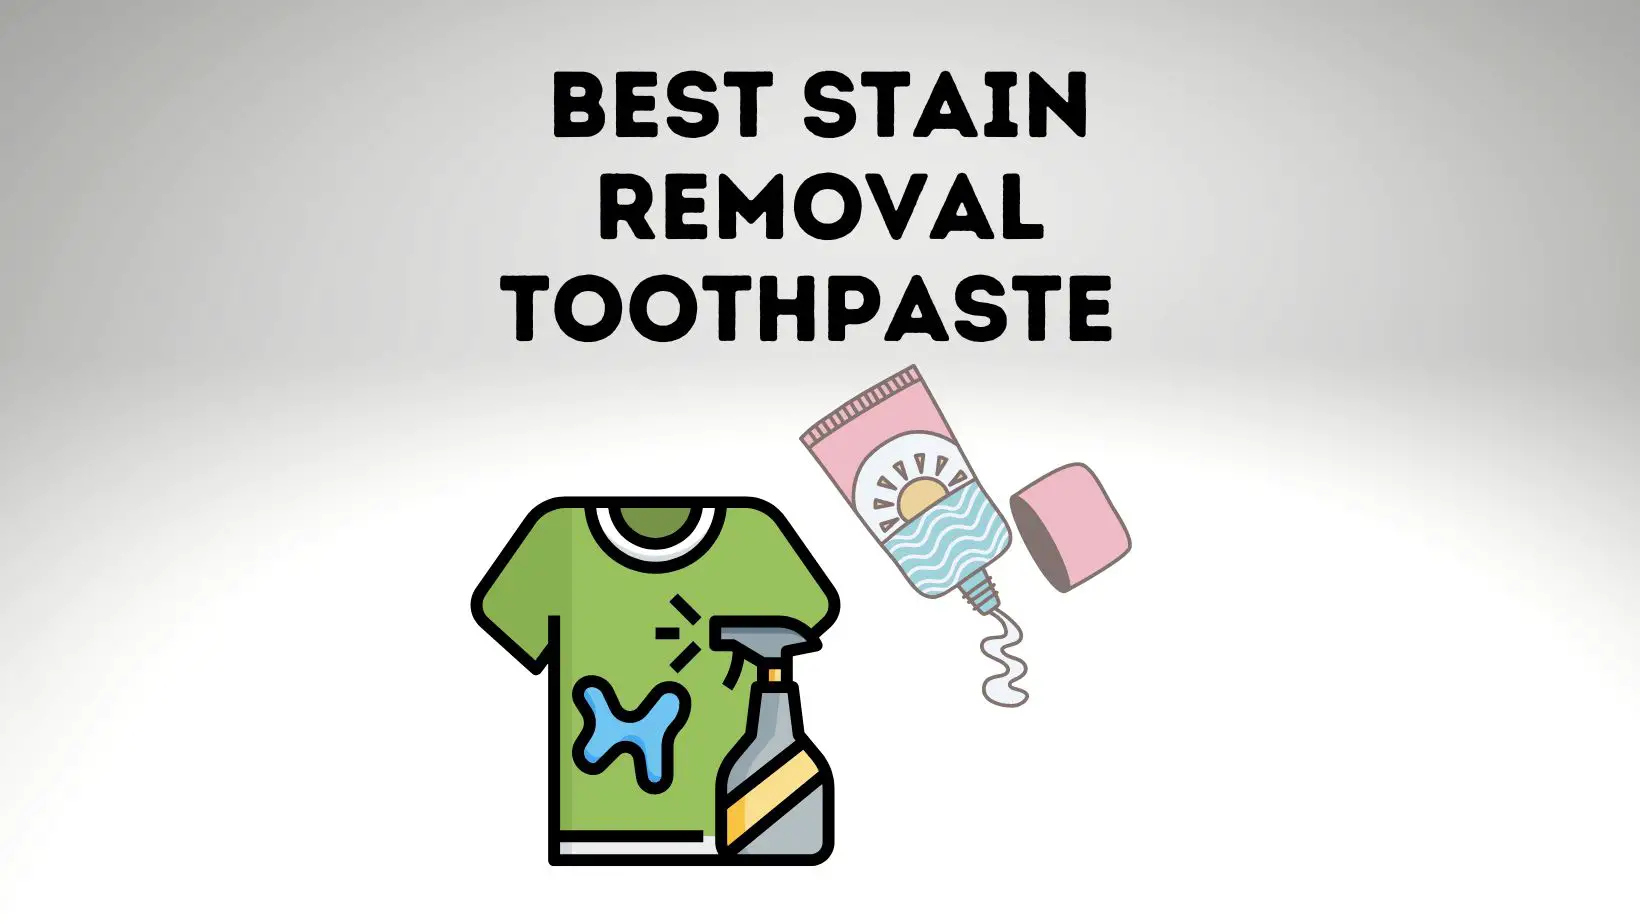 5 Most Effective Stain Removal Toothpaste